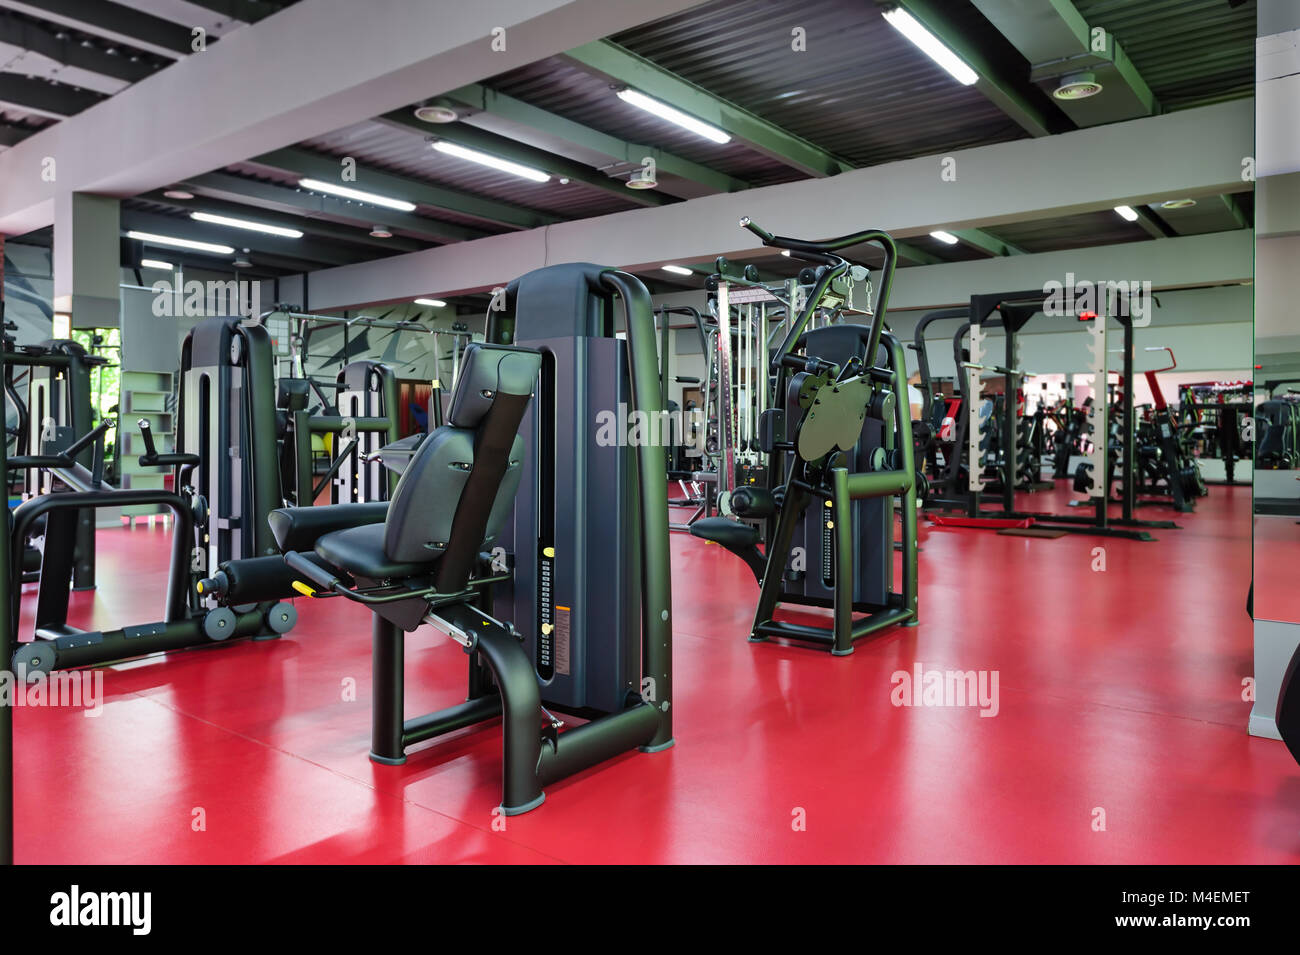 red and black gym